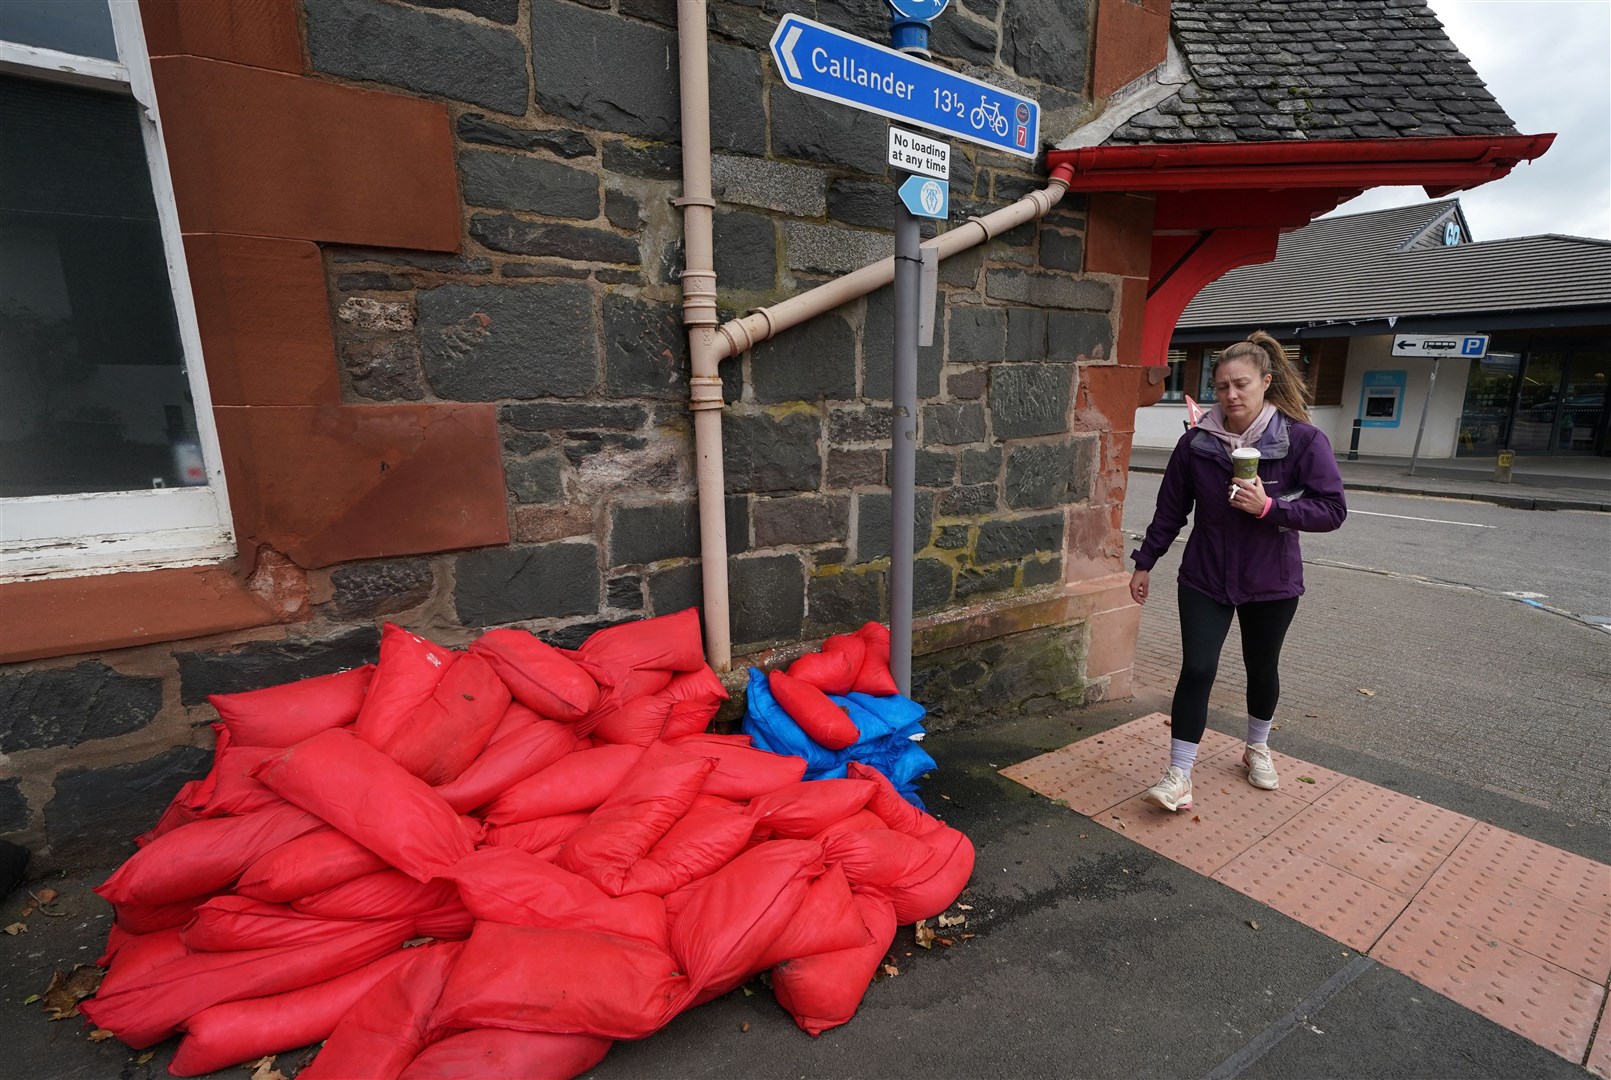 Sand bags sit piled against a wall in the main street in Aberfoyle, Perthshire (Andrew Milligan/PA)